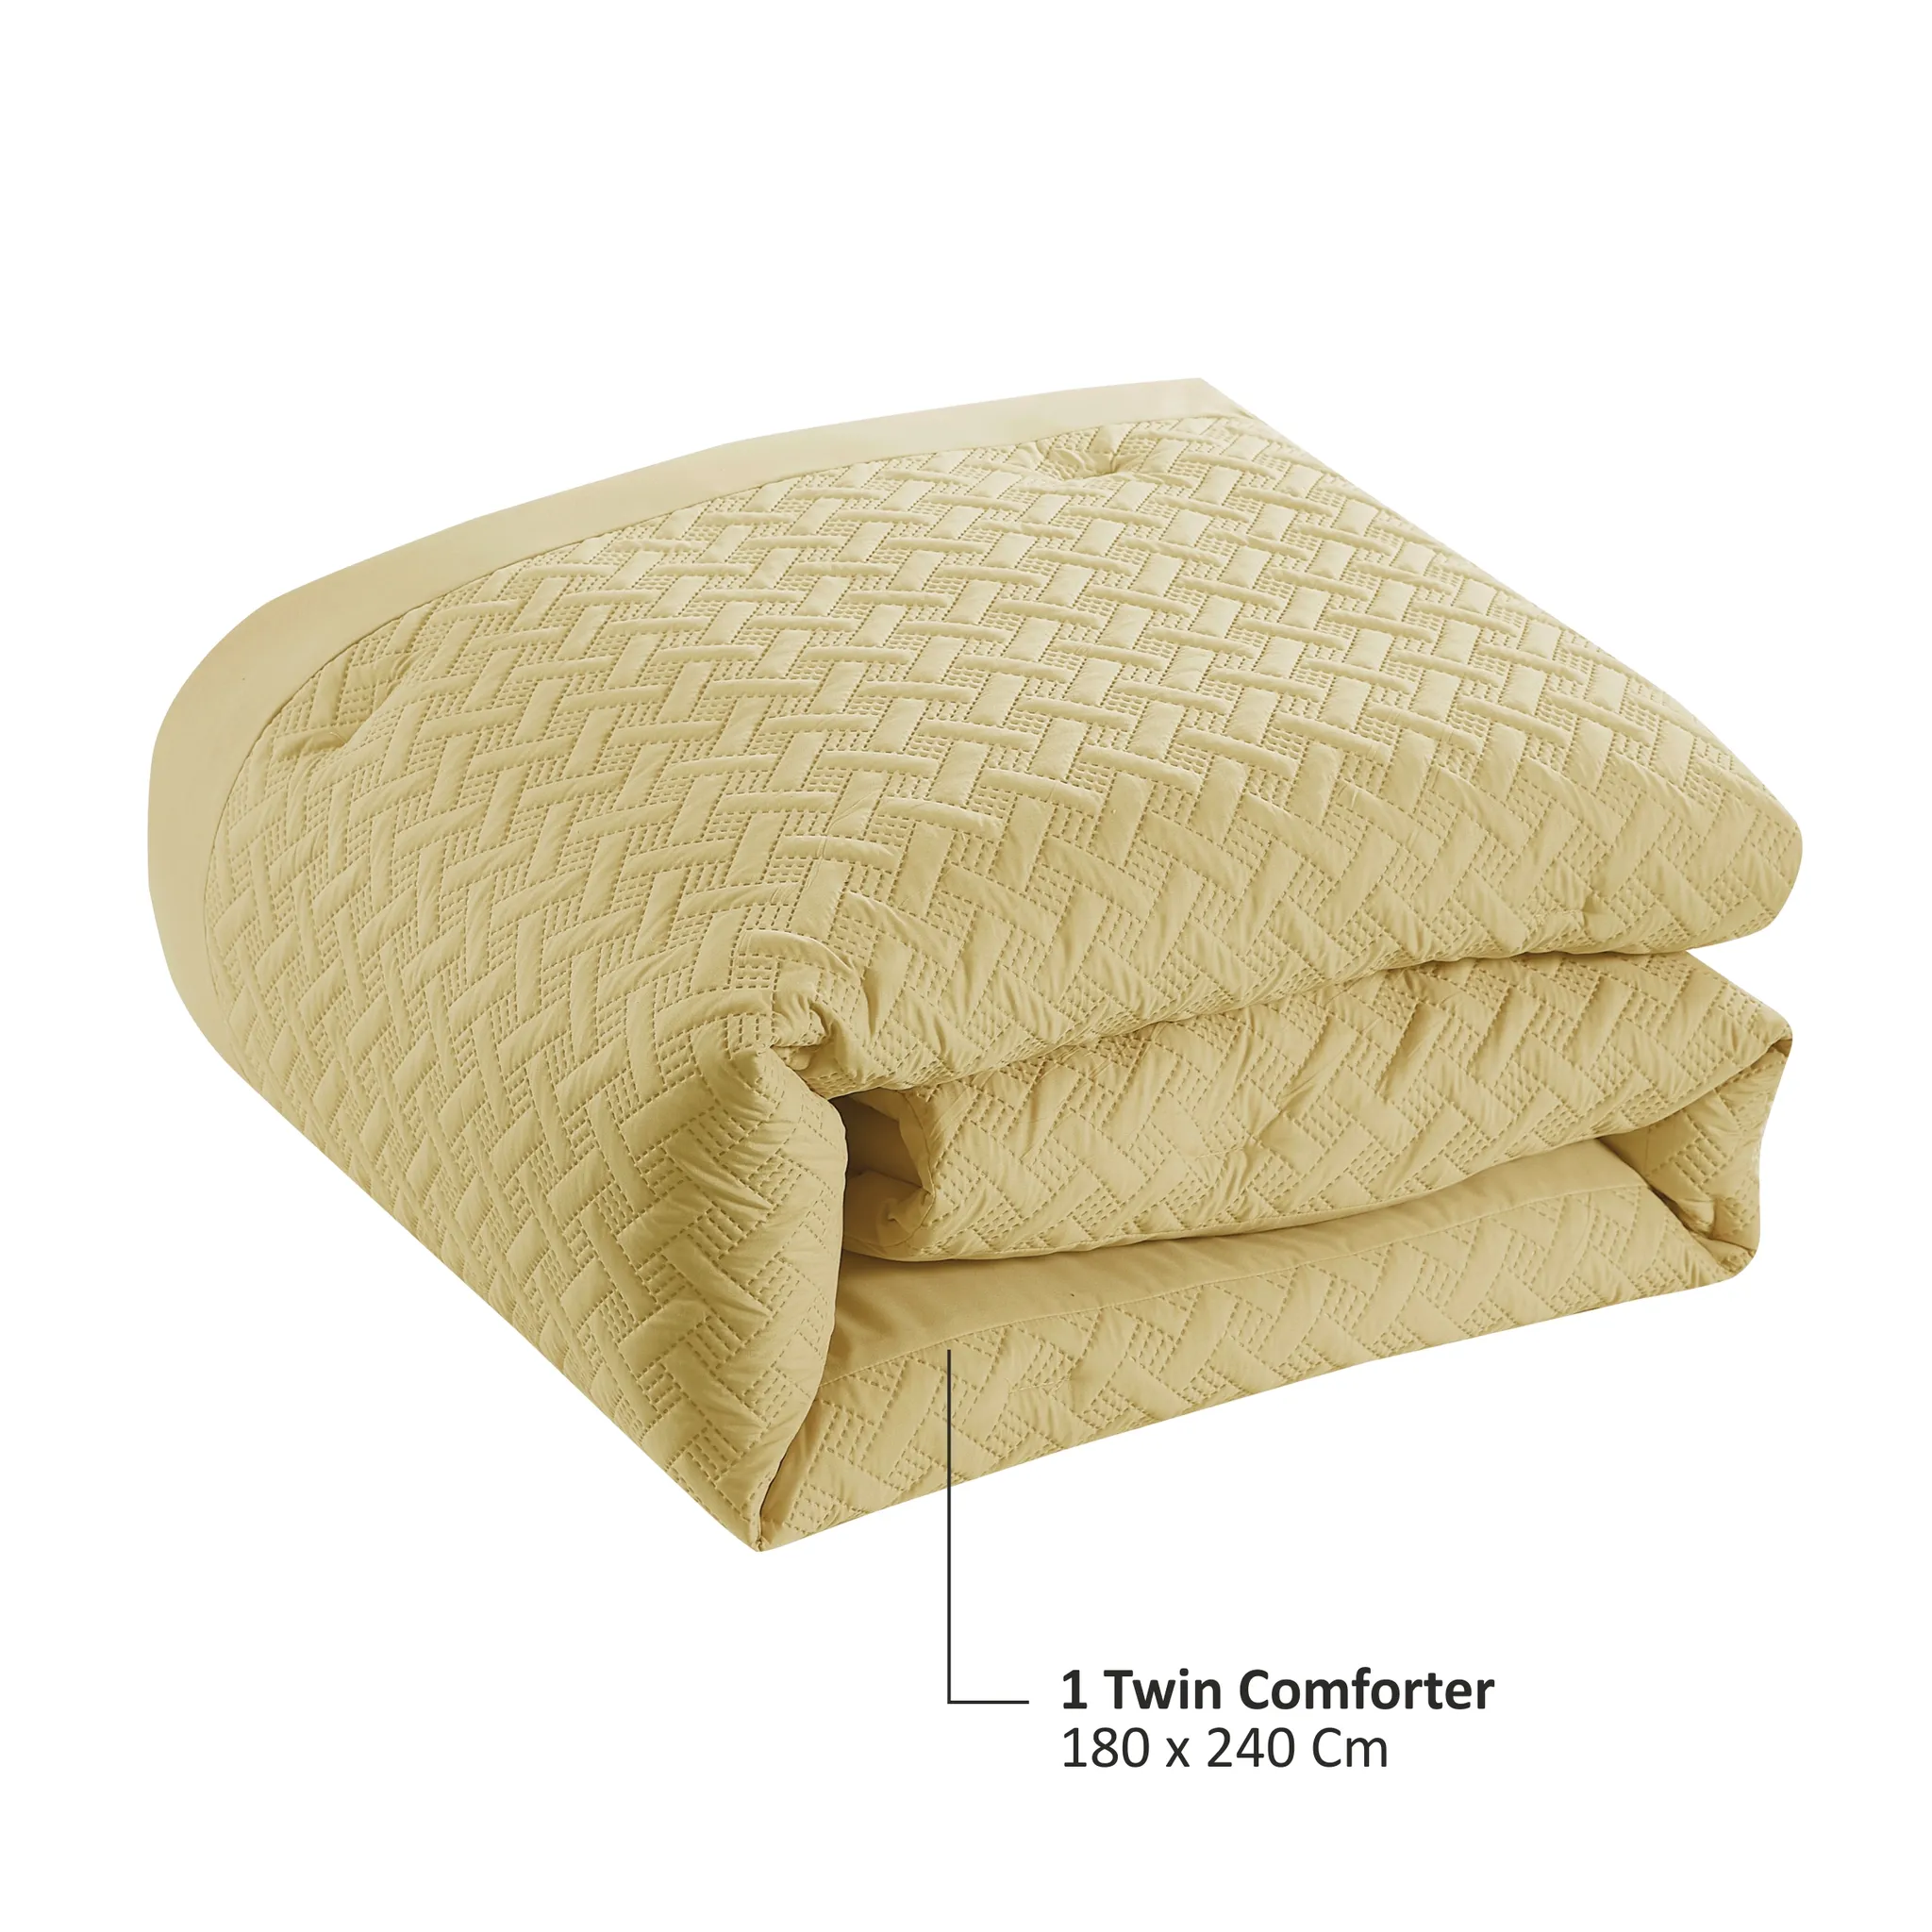 Ultrasonic Patch Worked Comforter Set 4-Piece Single Gold